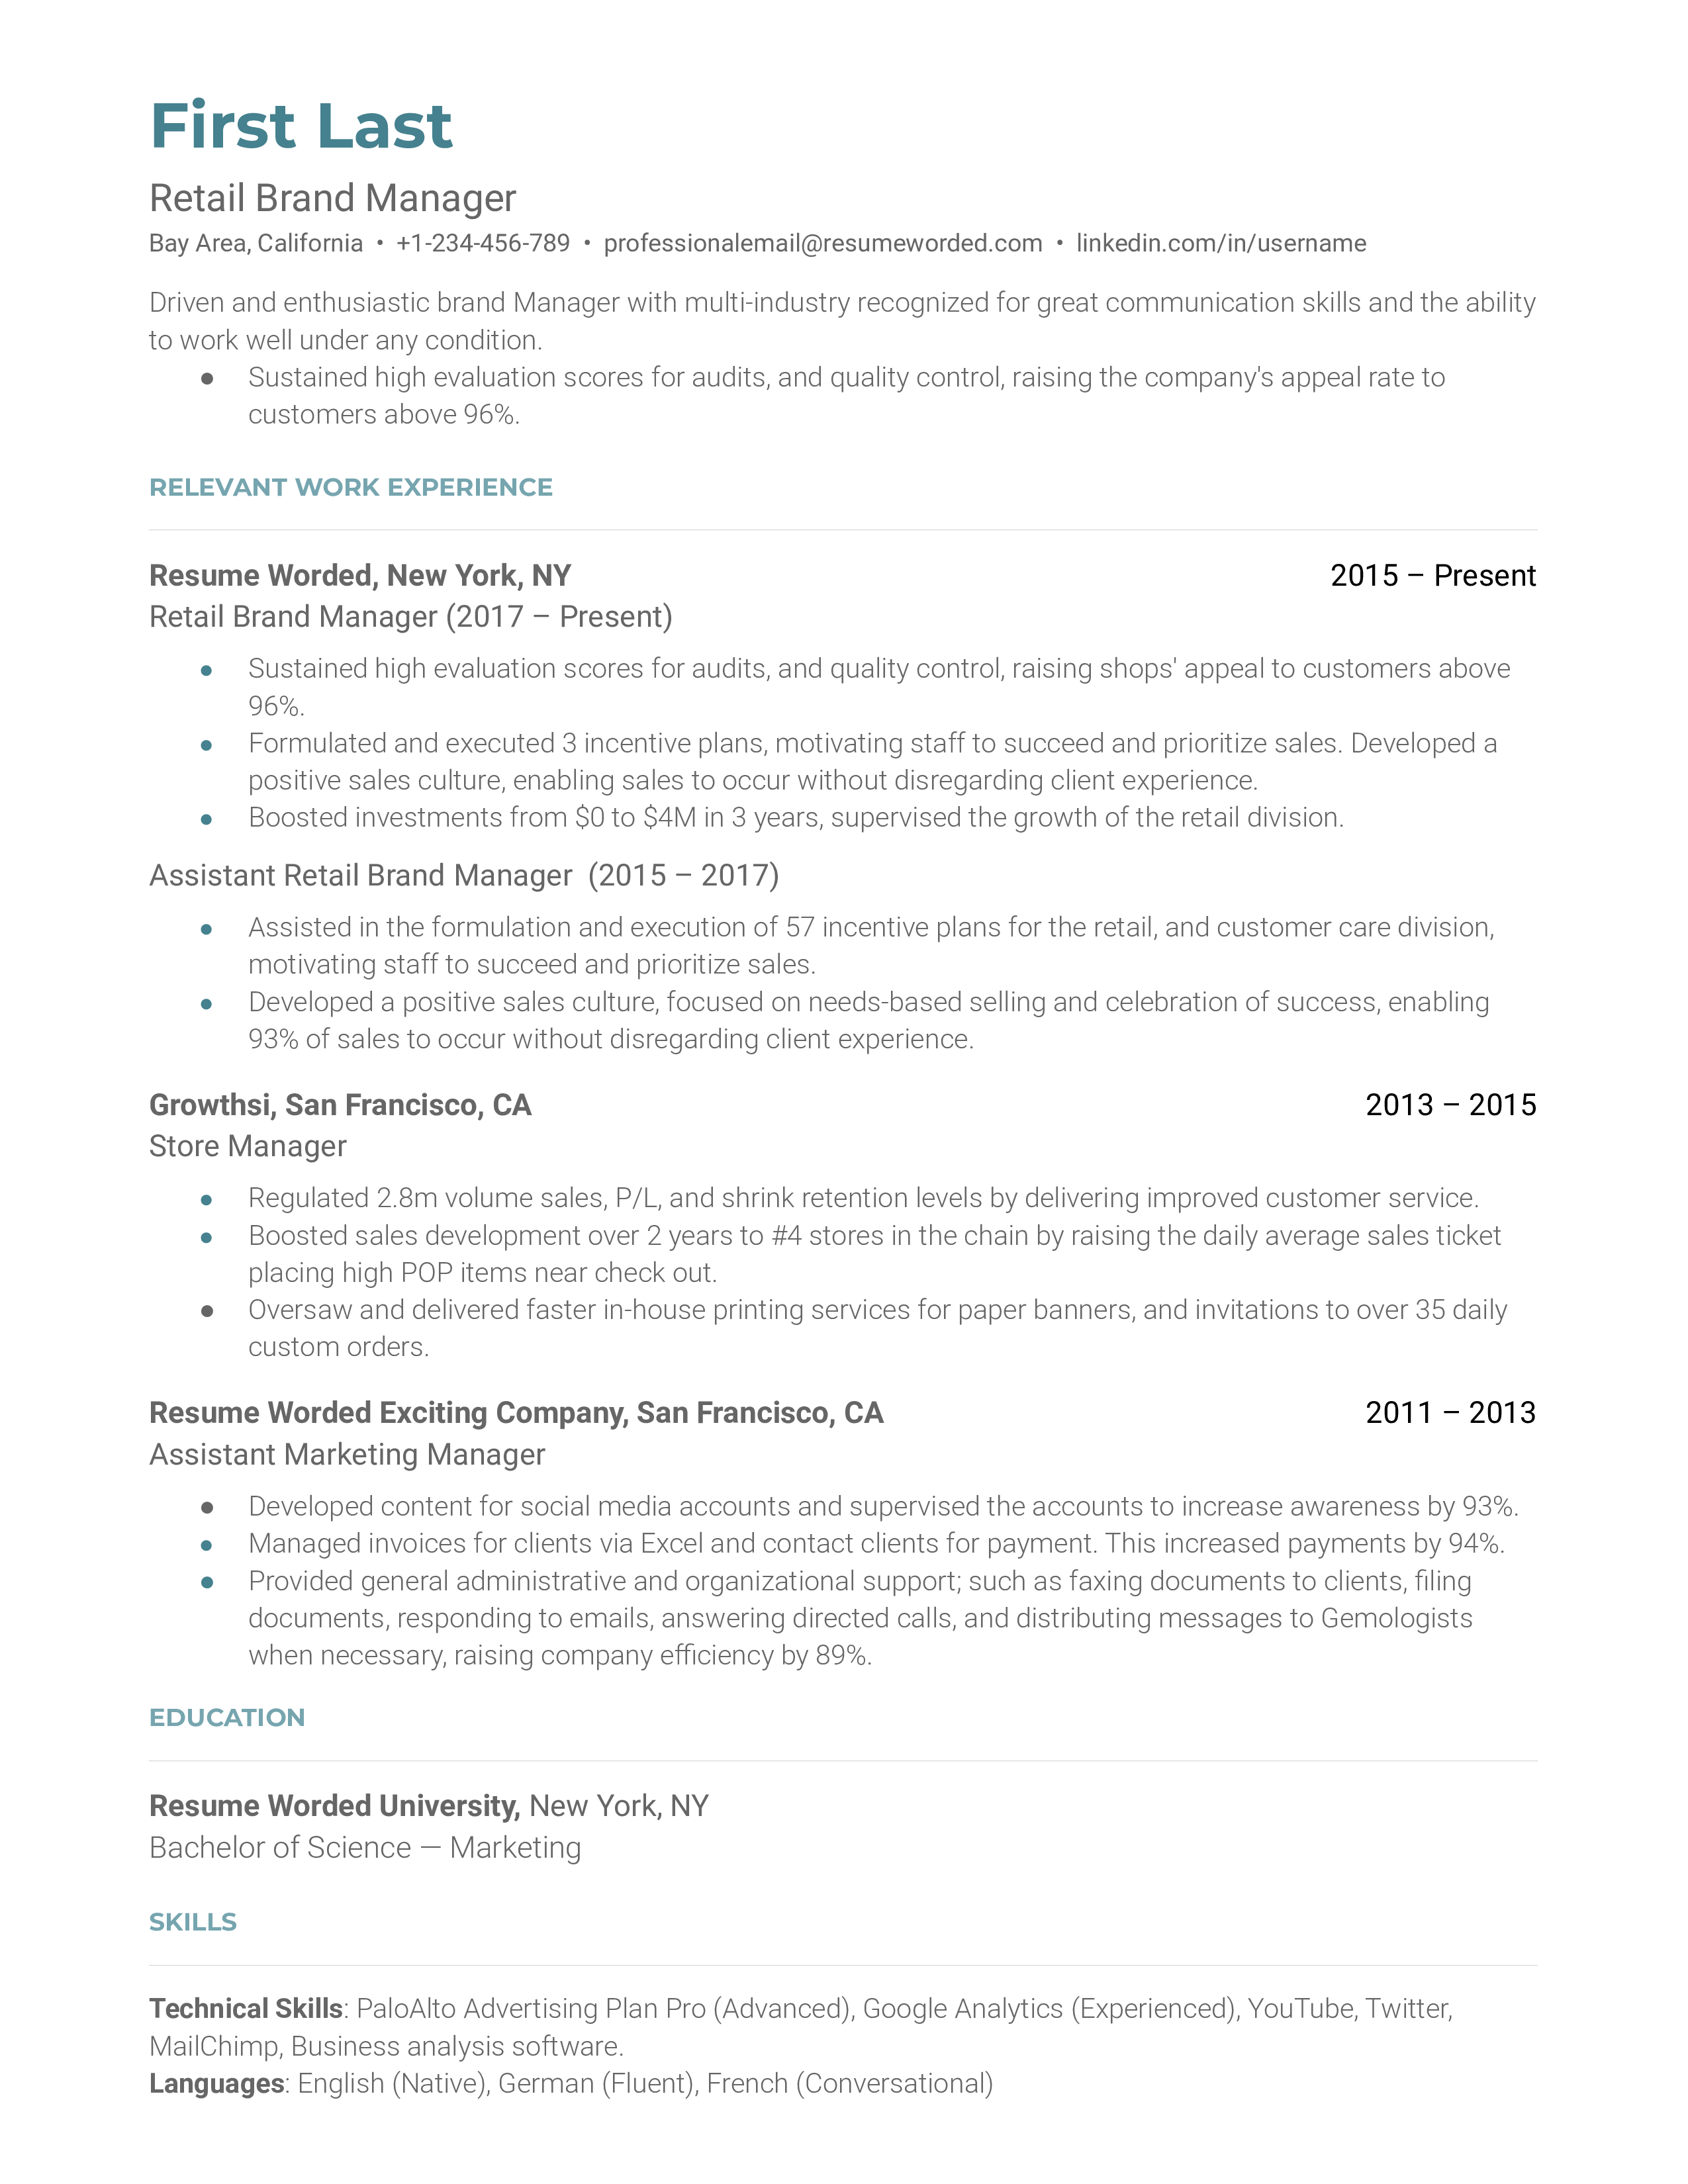 A resume for a retail brand manager featuring a BSN in marketing, and experience as a store manager and assistant retail brand manager.